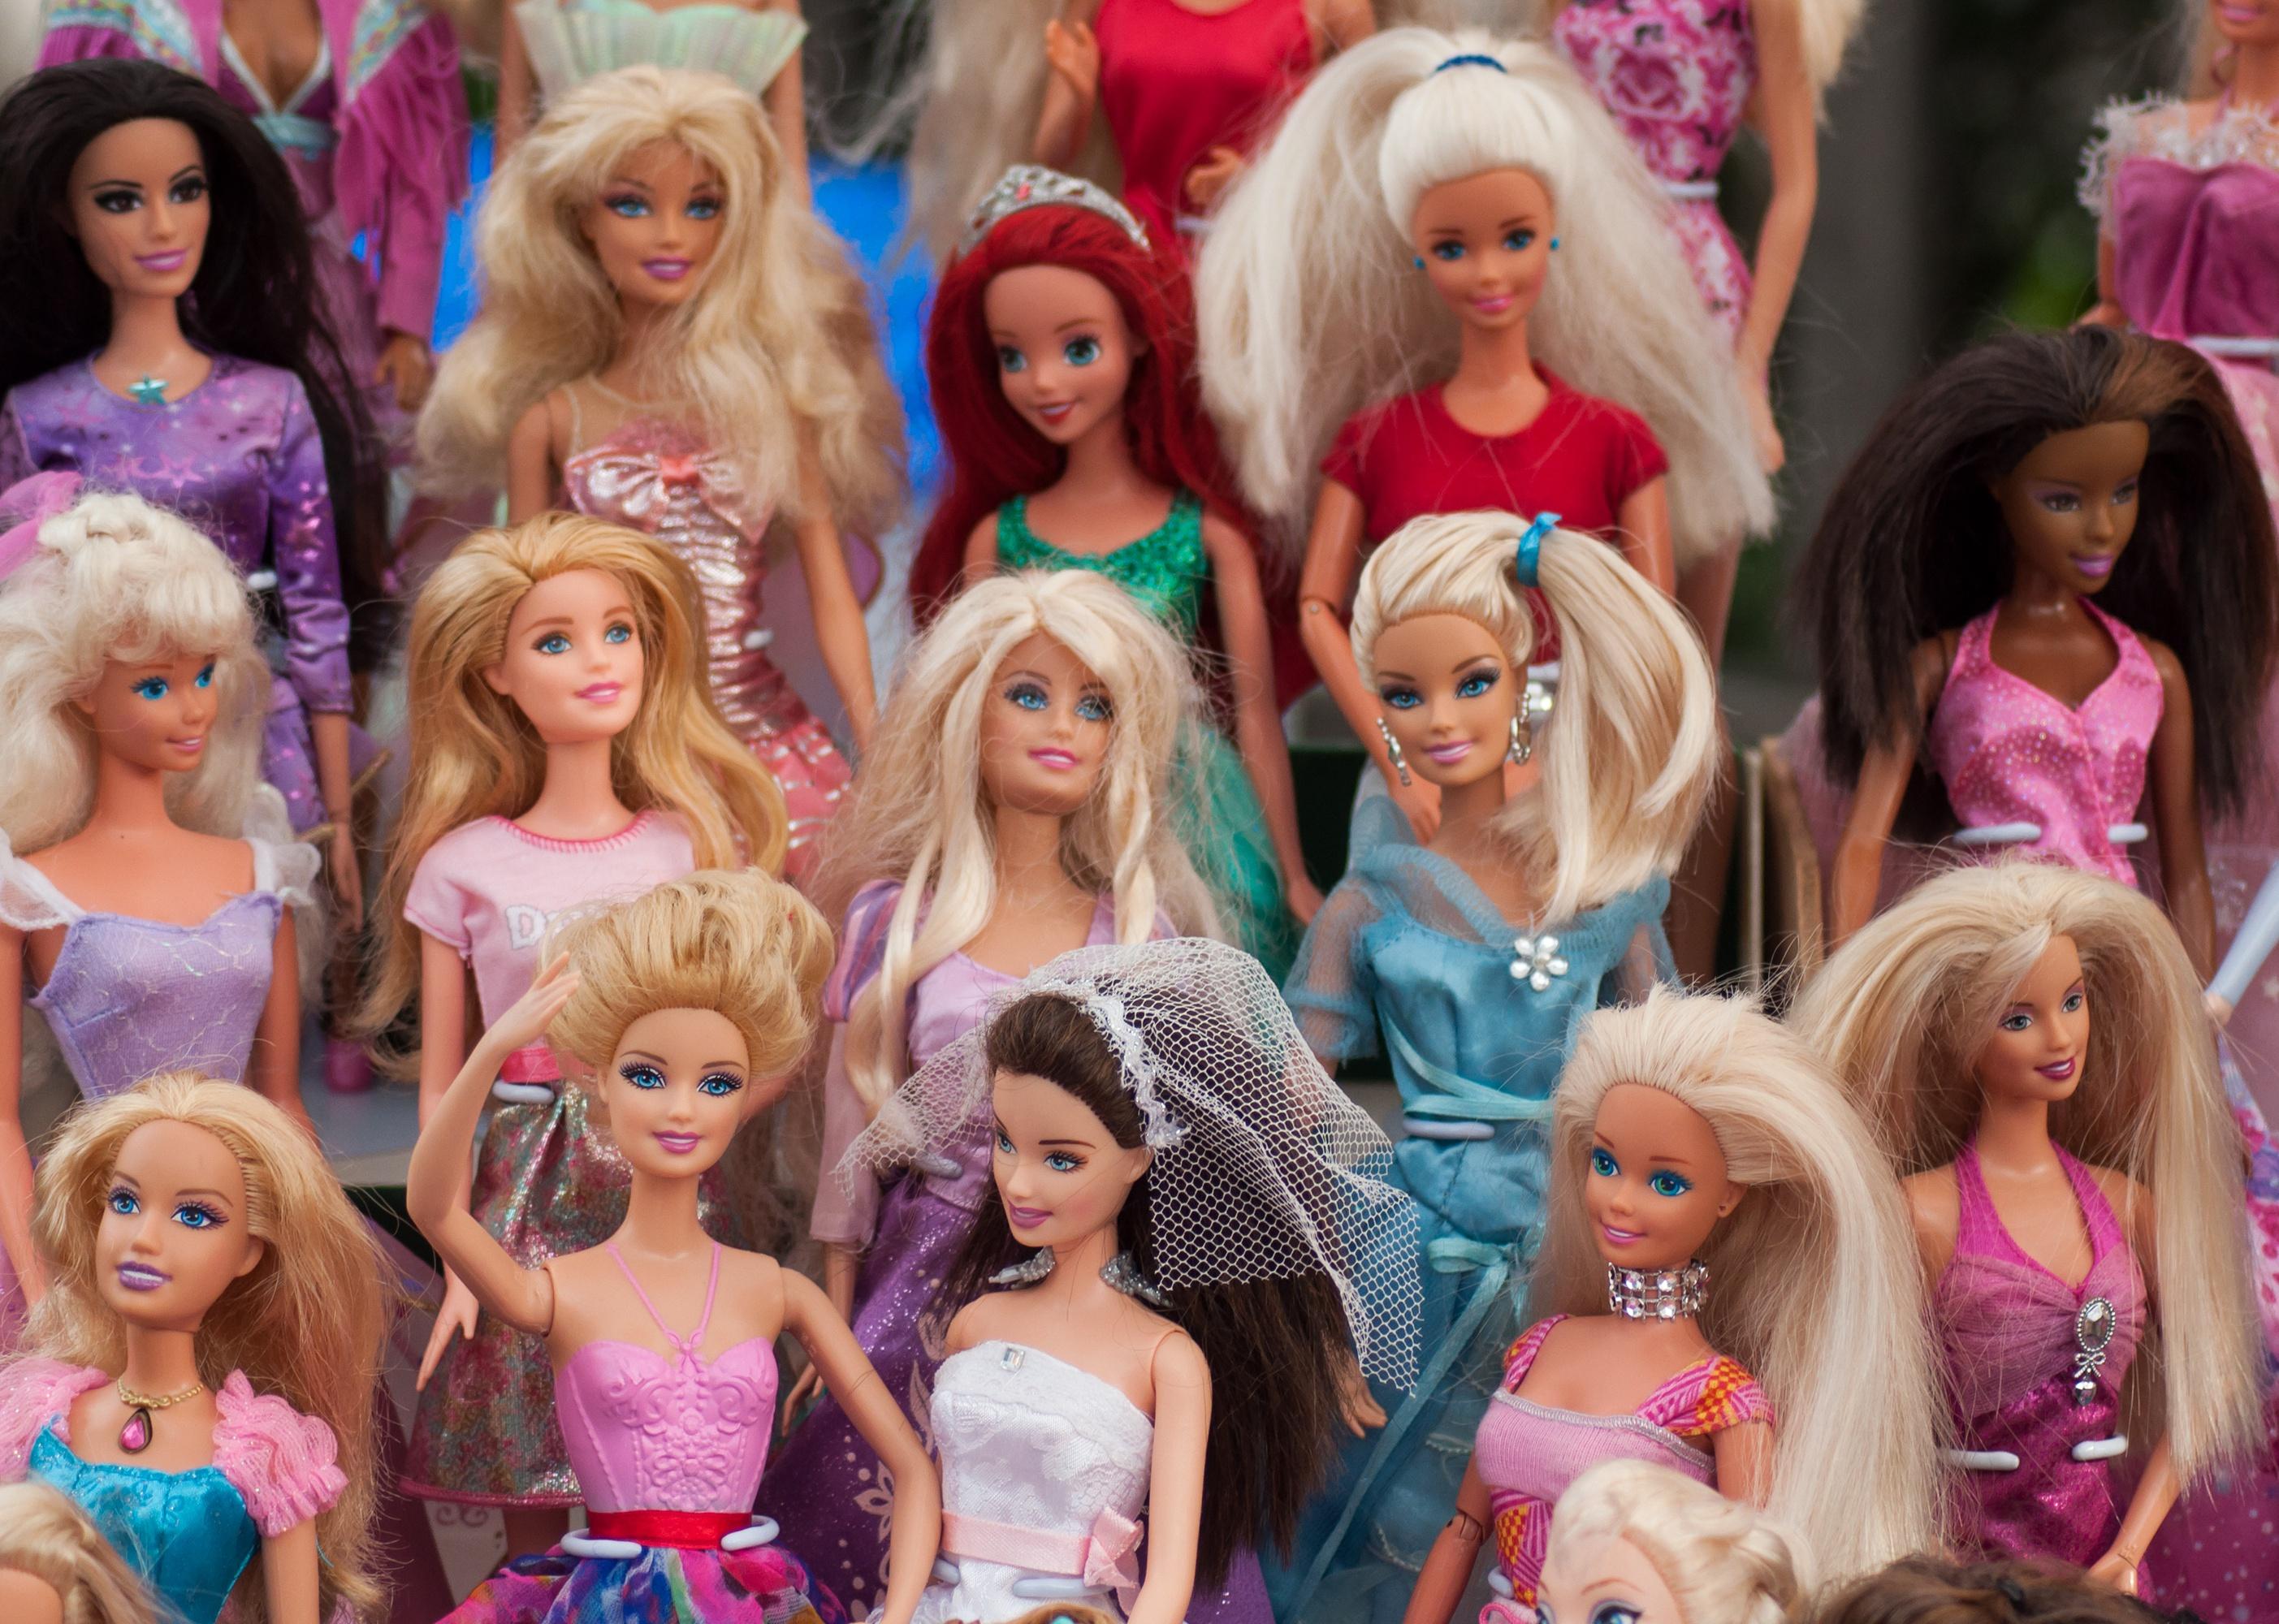 Close-up of Barbie dolls on display.